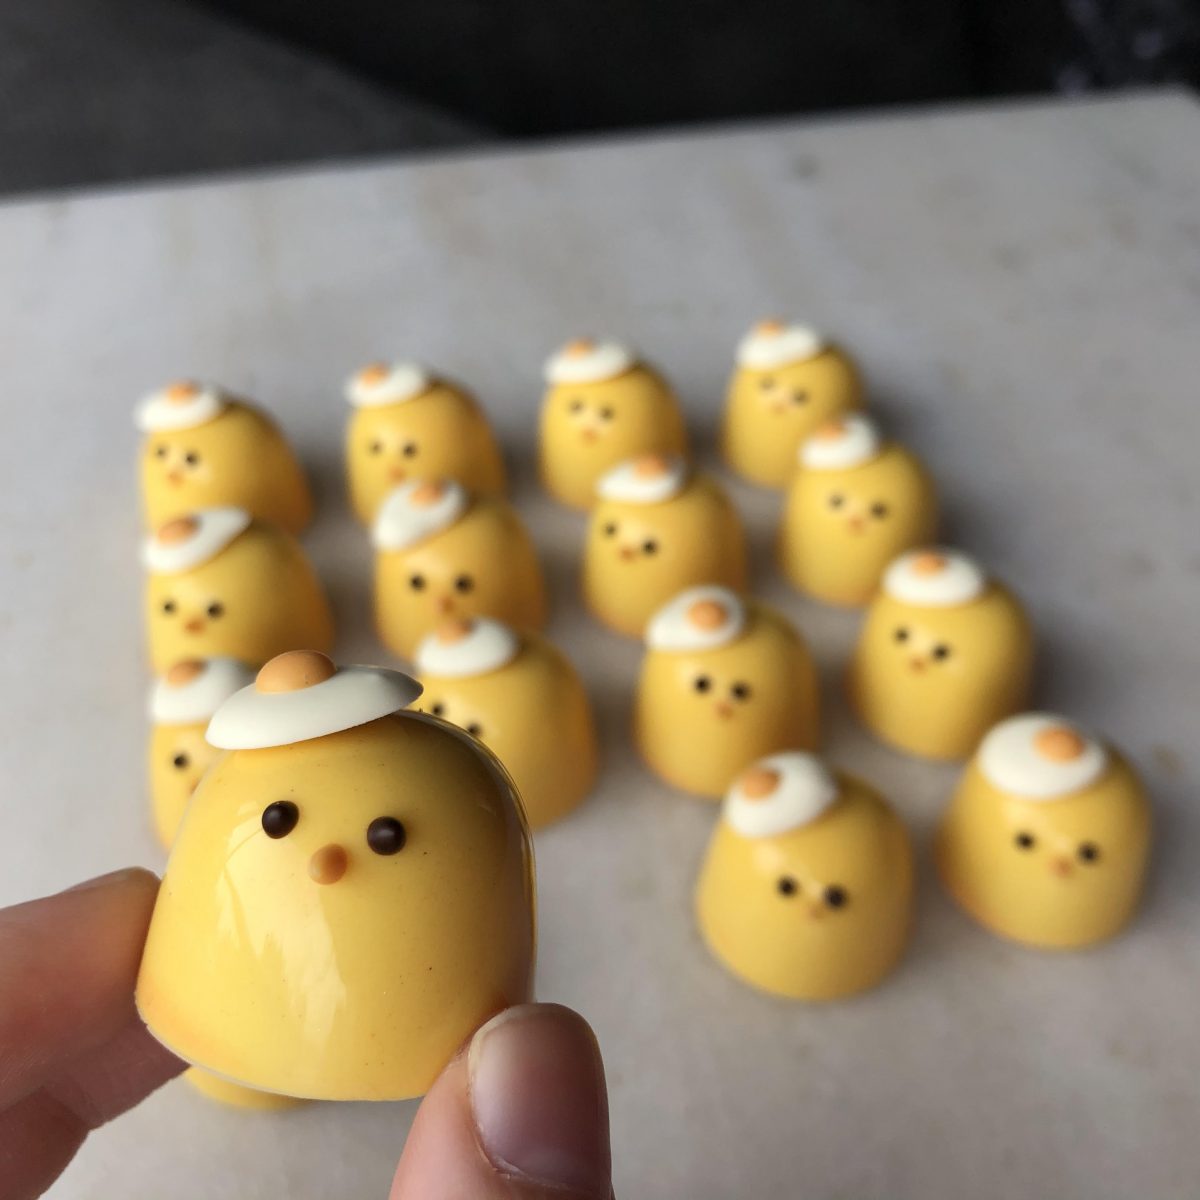 Small, yellow hens made of chocolate. 